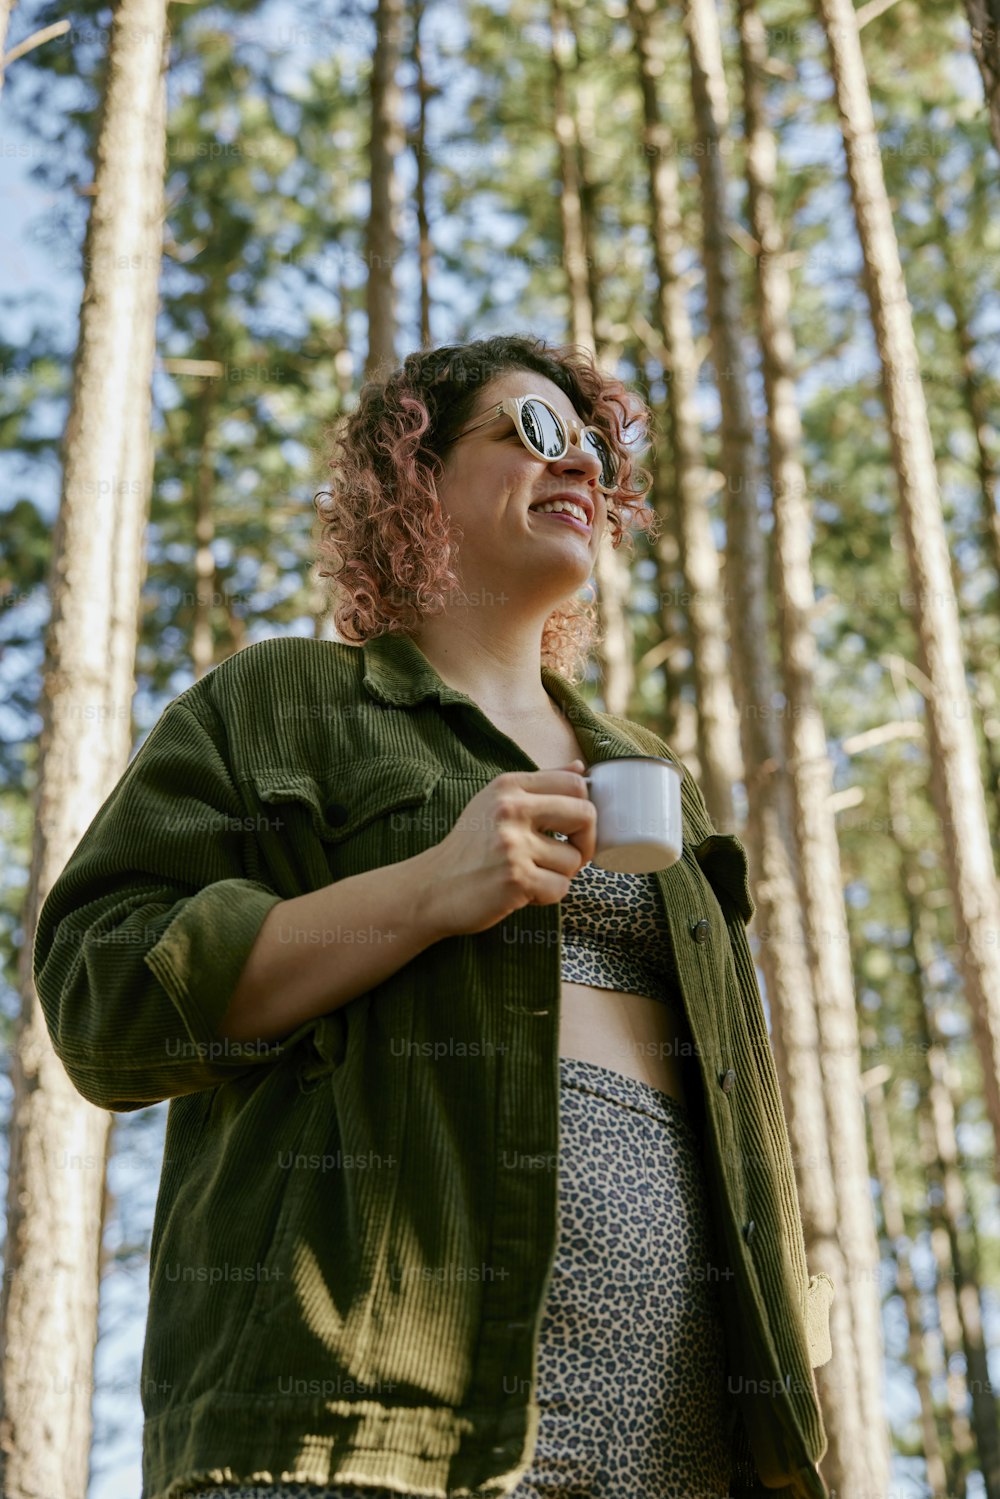 a woman standing in a forest holding a cup of coffee